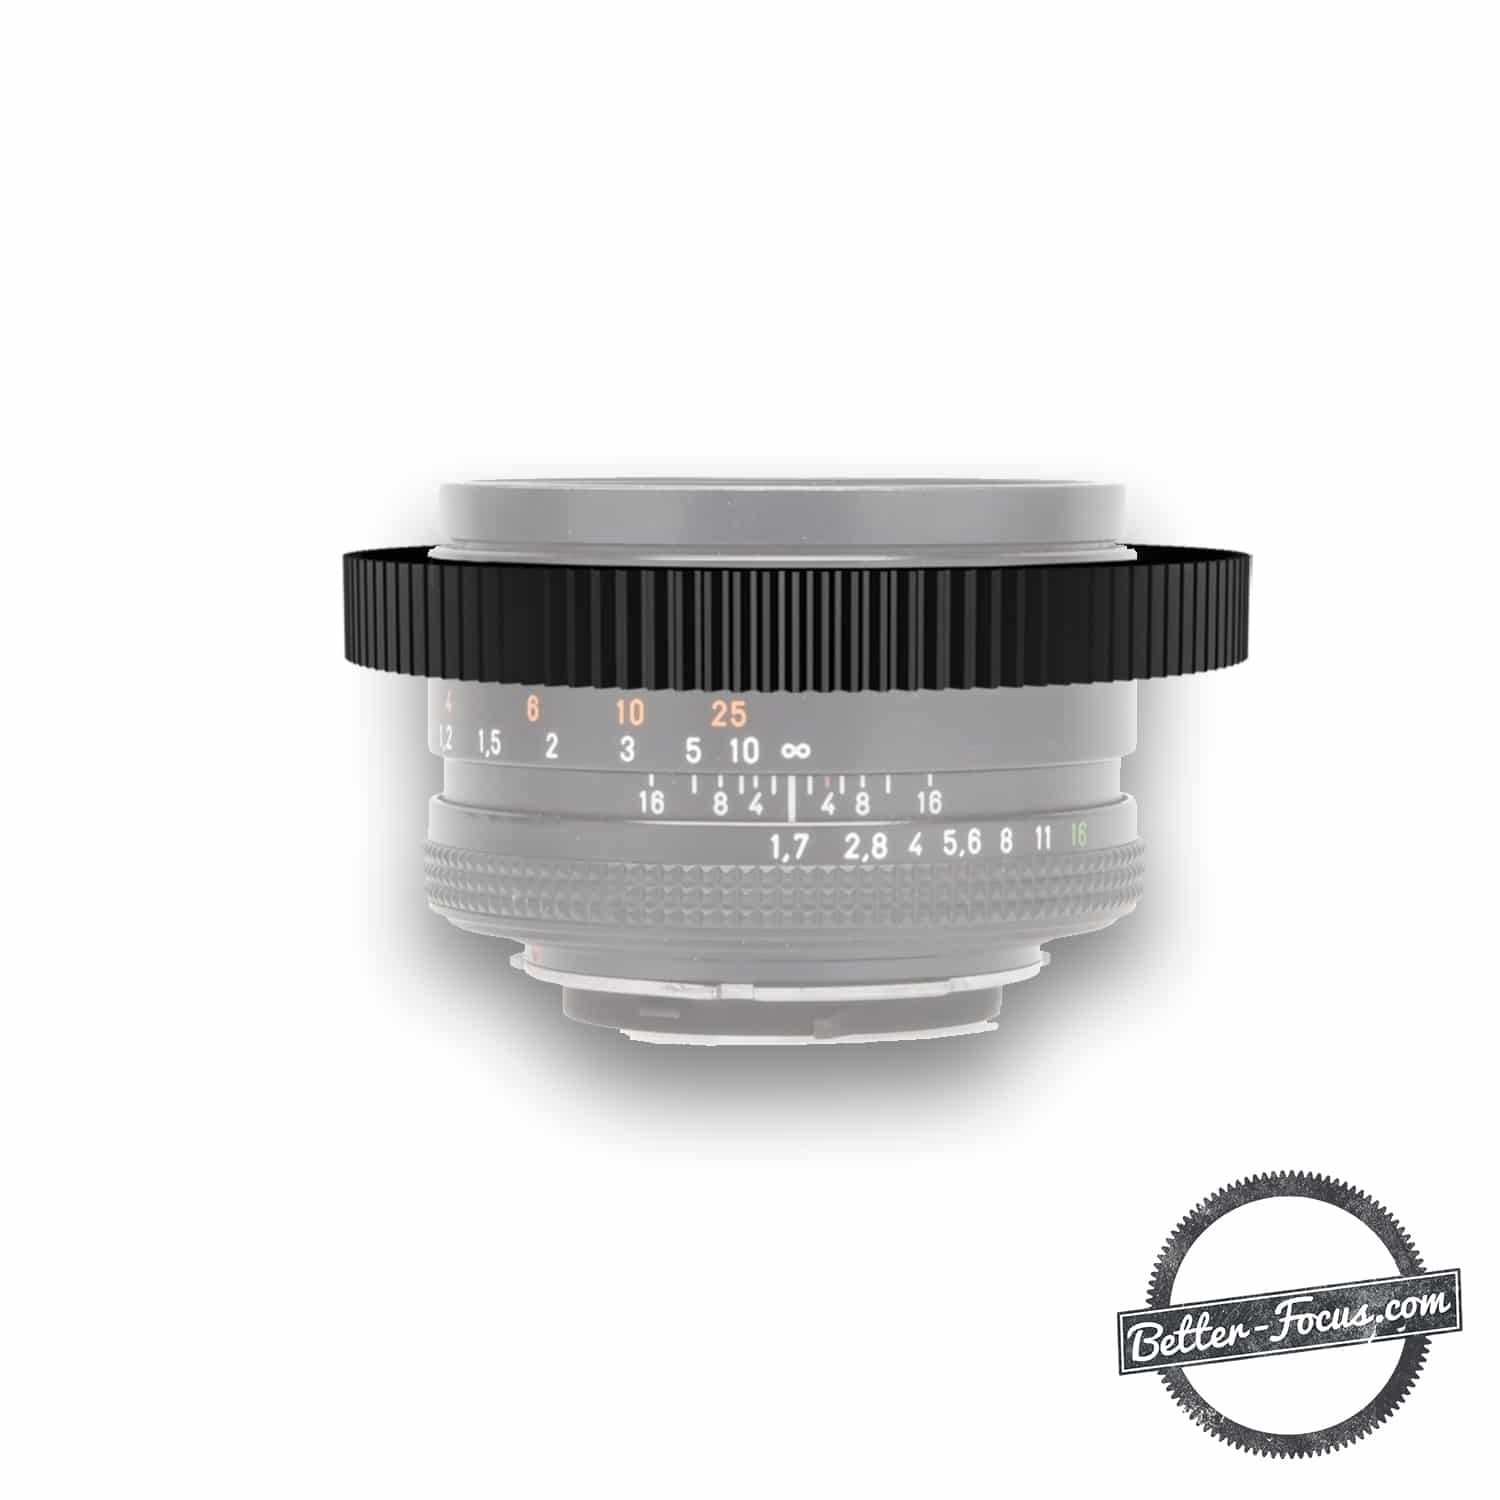 Perfect fitting Follow Focus Gear for CONTAX ZEISS 50MM F1.7 PLANAR lens